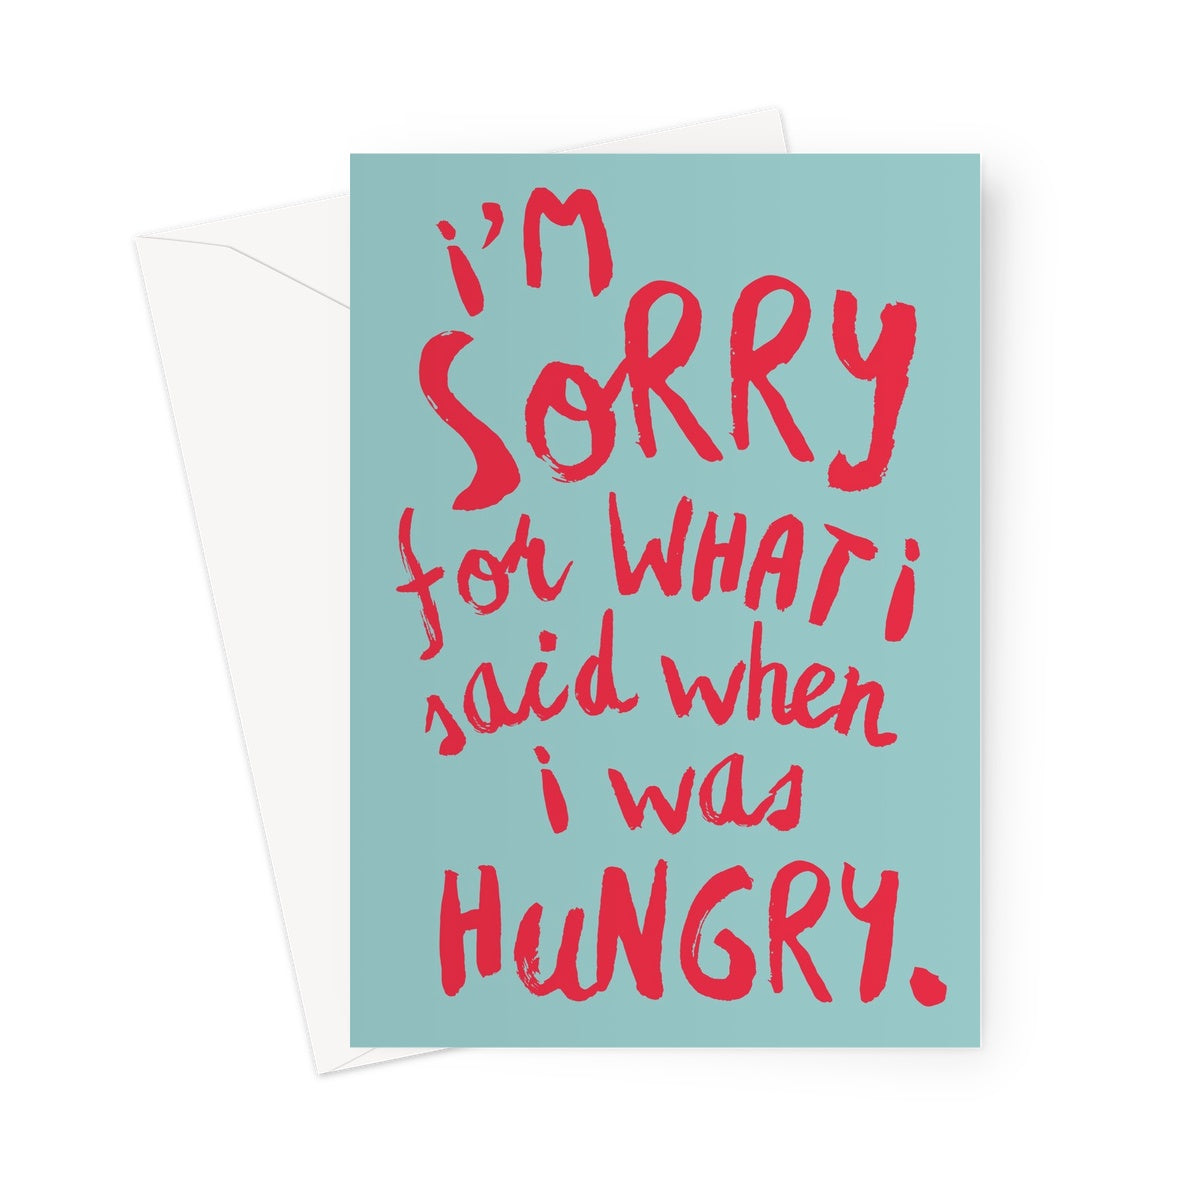 HANGRY - Blue/Red Greeting Card